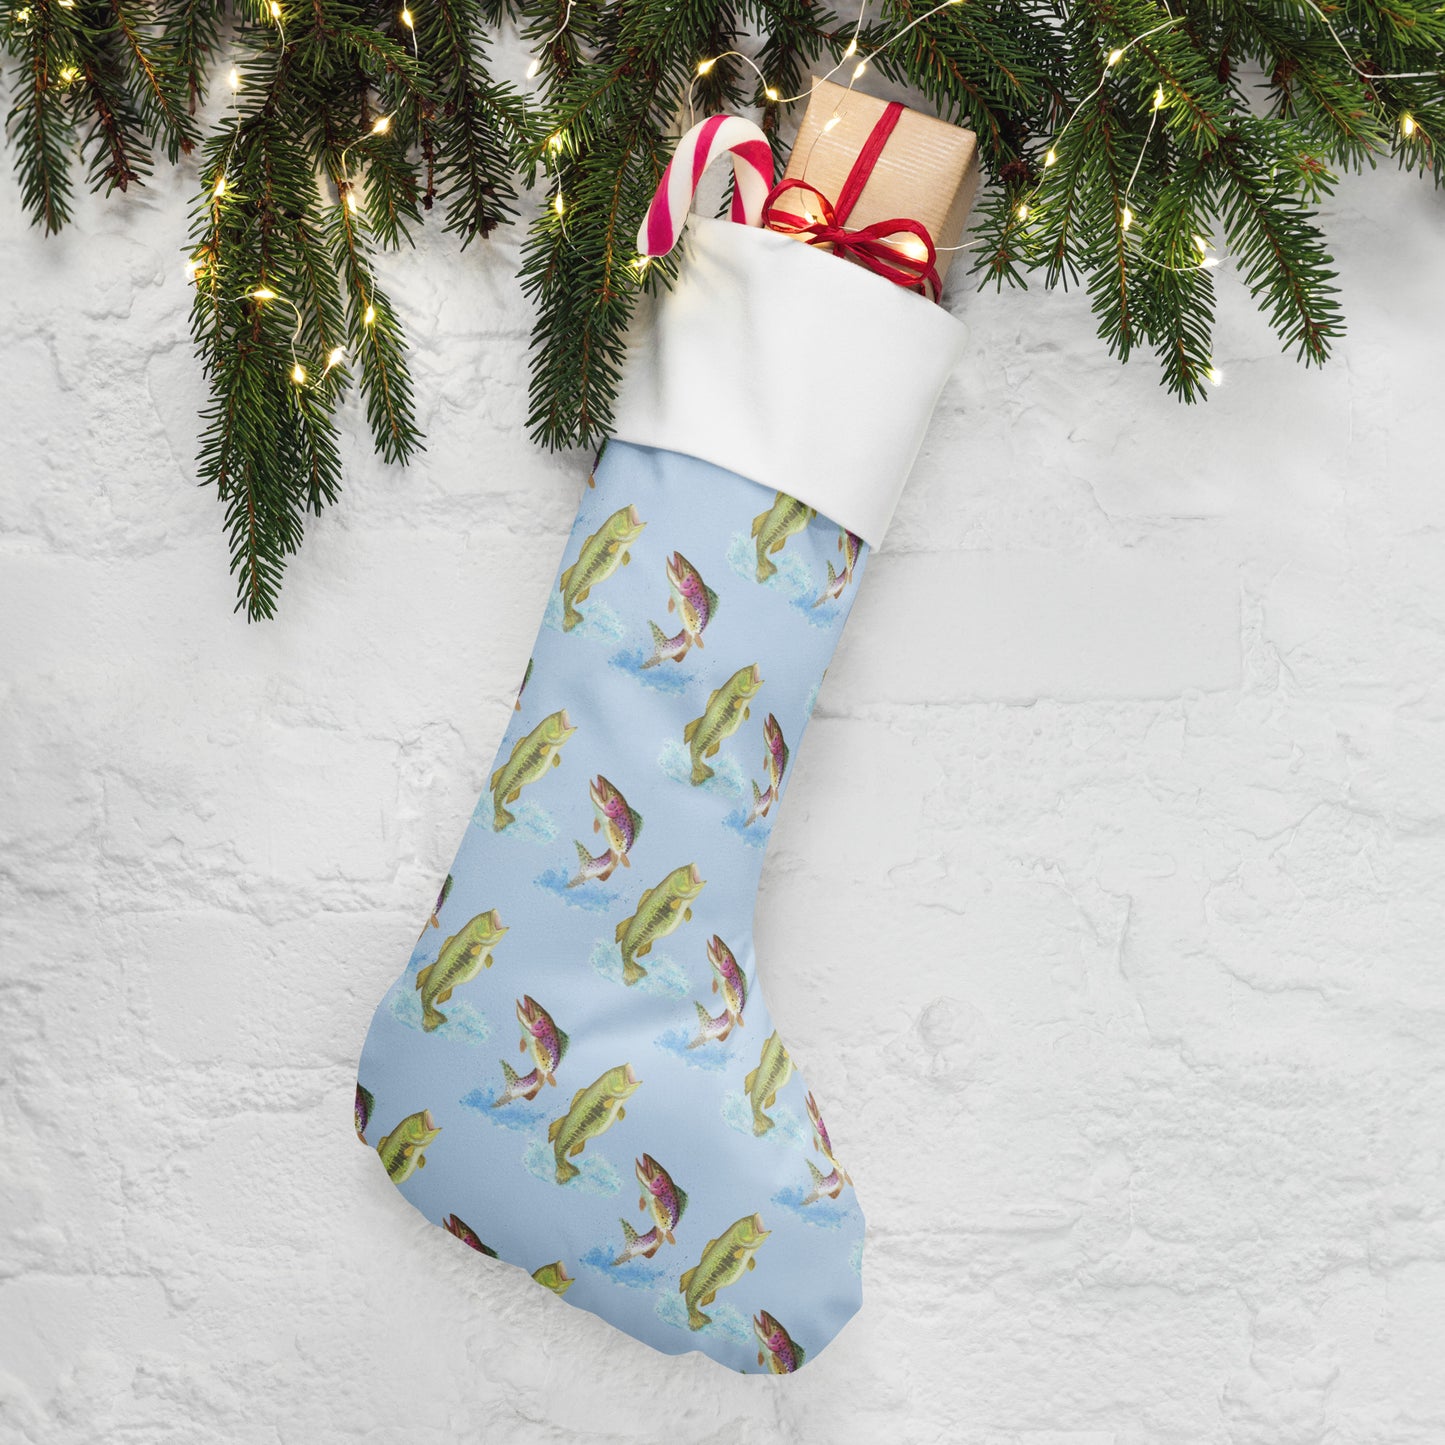 Limited Edition Blue Fishing Christmas Stocking.  7 by 18 inches. The front has watercolor rainbow trout and largemouth bass patterned on a blue background and an off-white polyester back fabric. It has a white fold-over cuff and a hanging loop. Shown stuffed with gifts by pine boughs.